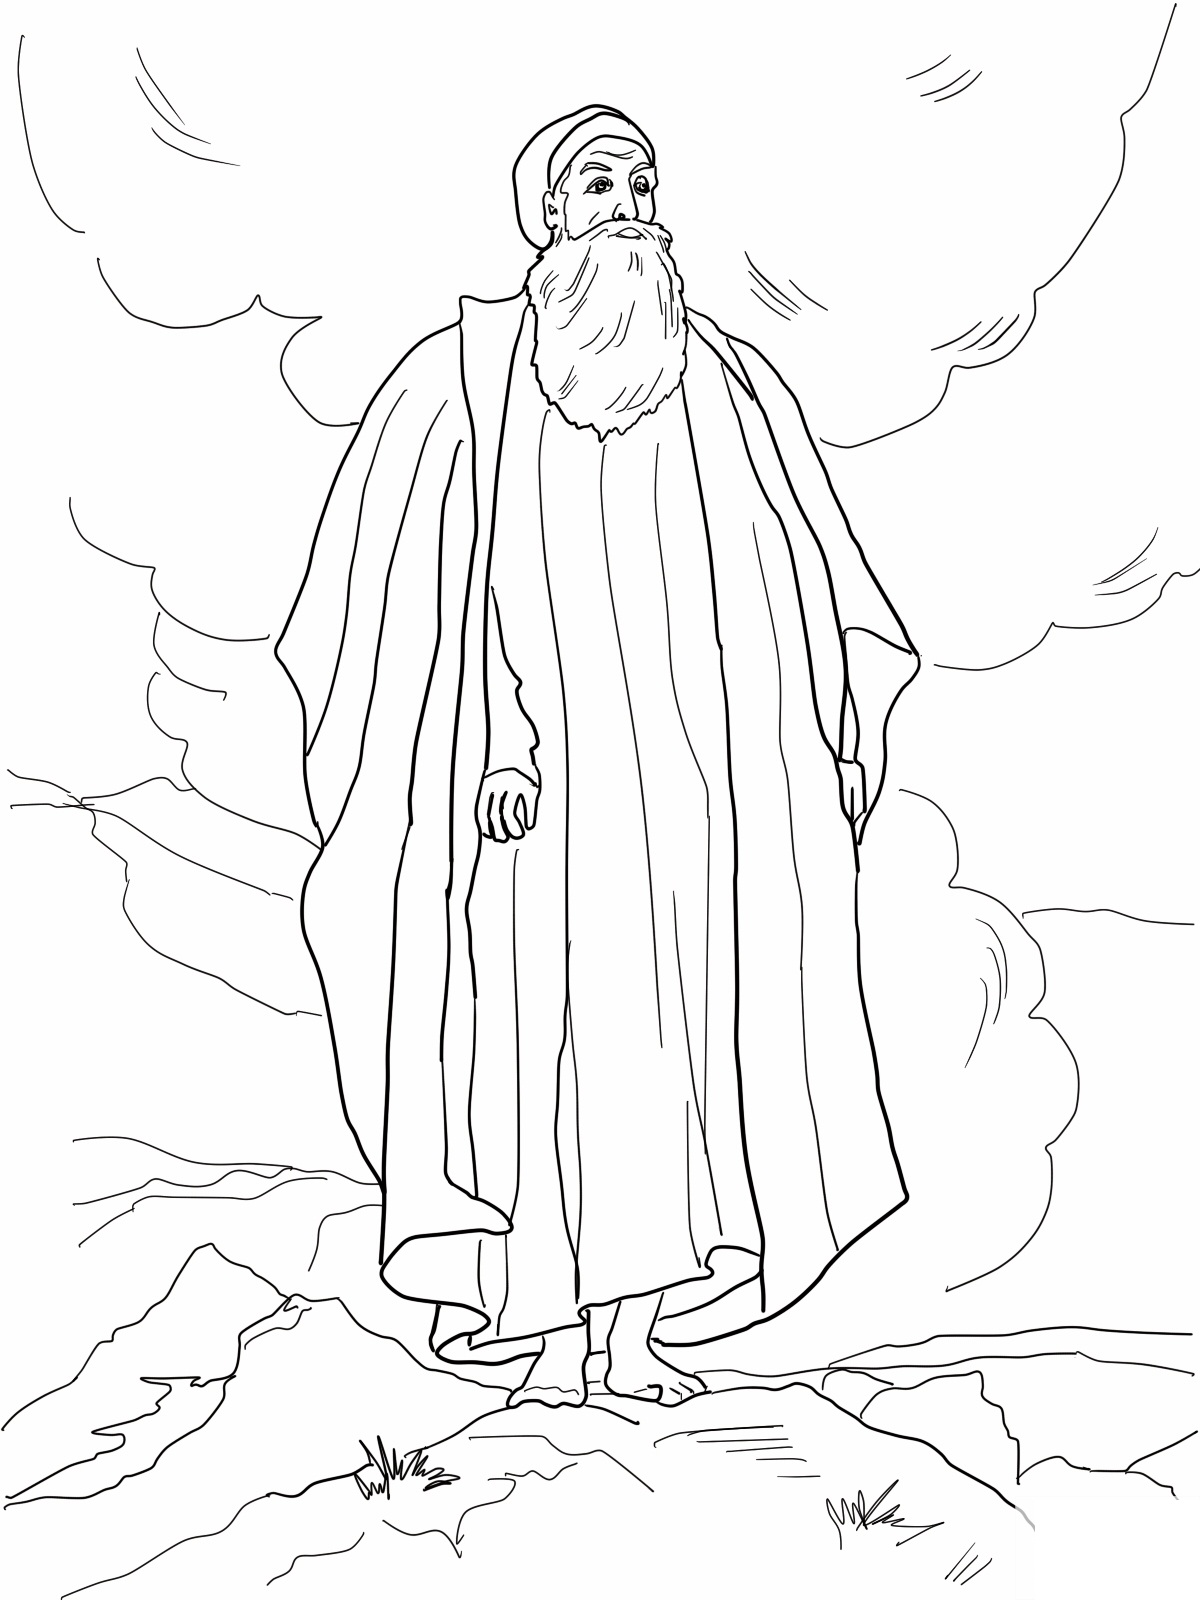 Moses Coloring Pages Printable Free - Printable Templates